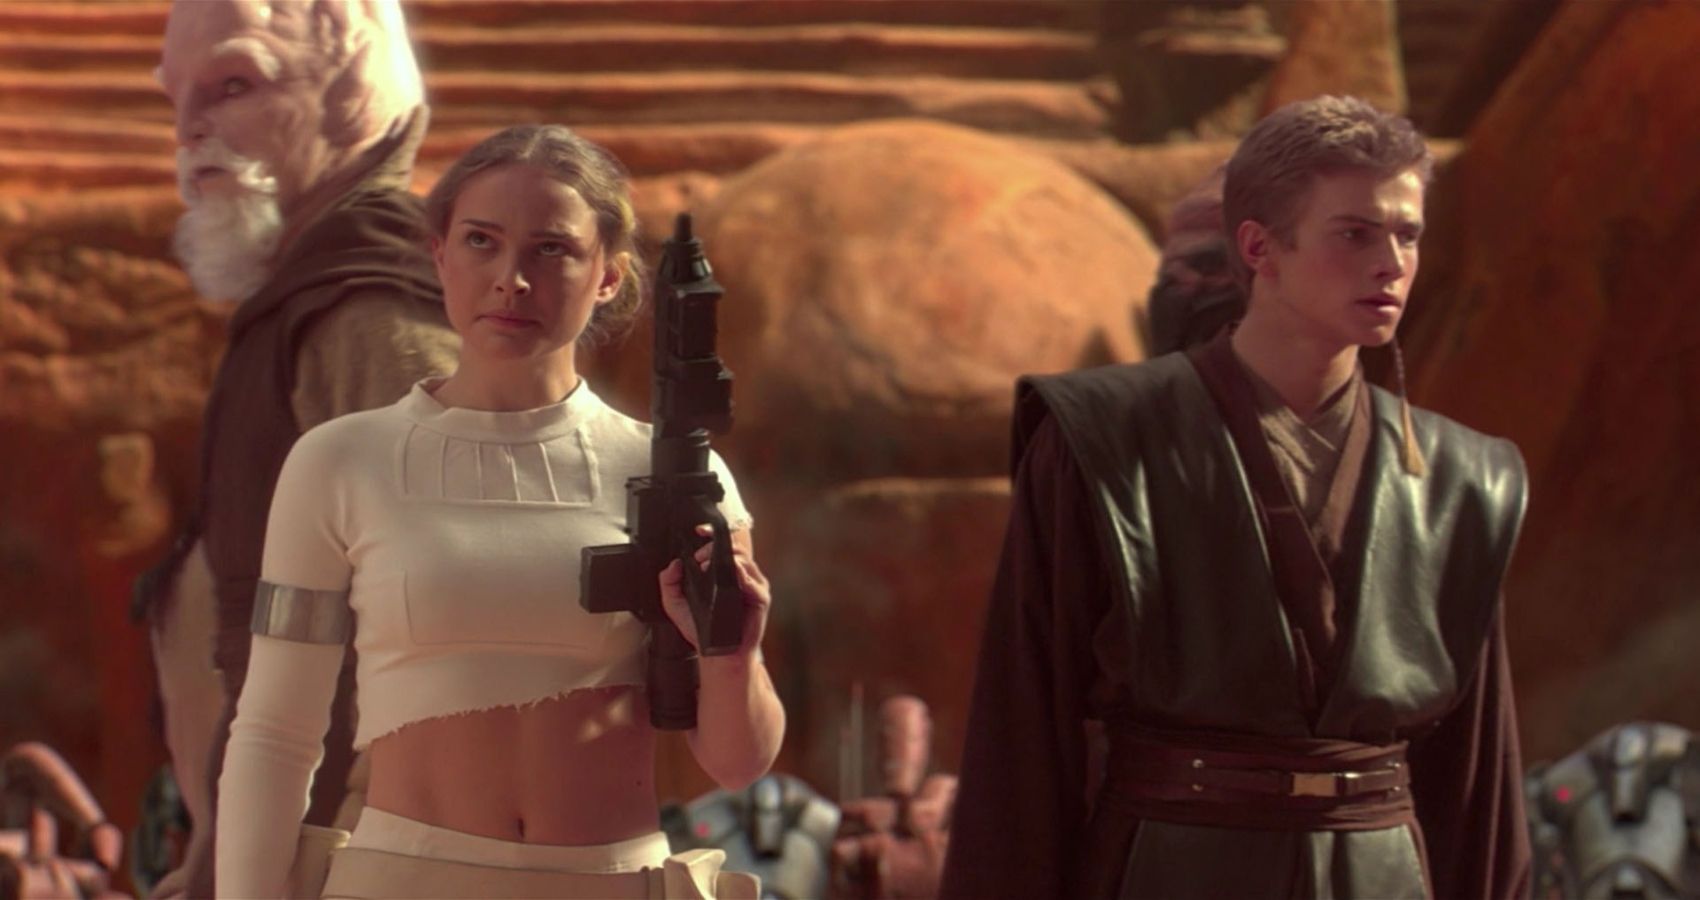 Anakin and Padme on Geonosis in Attack of the Clones